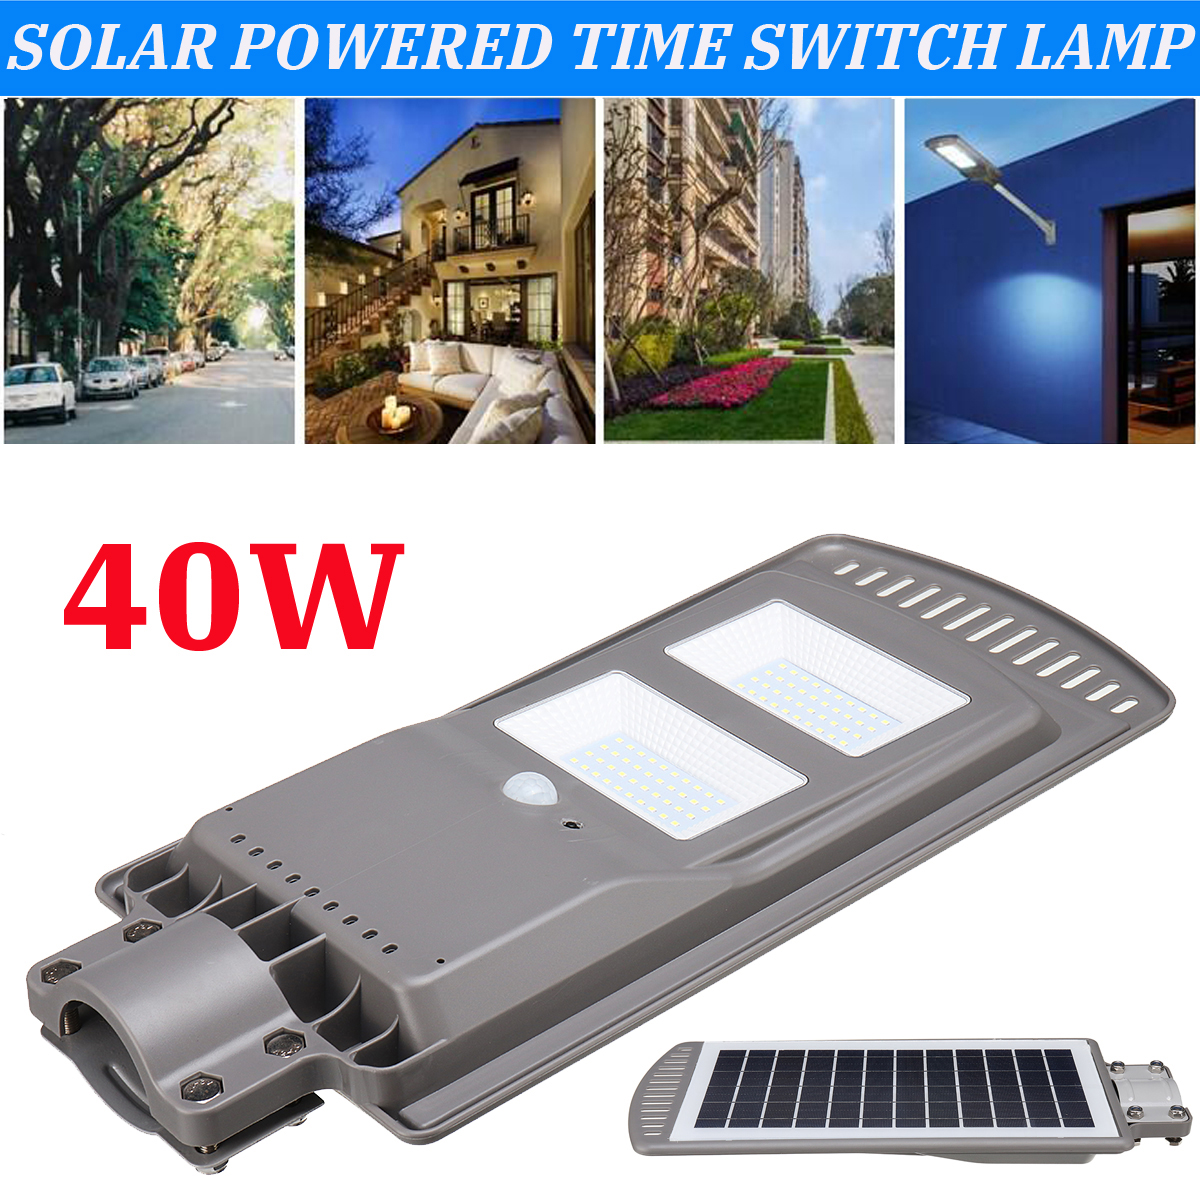 40W-LED-Solar-Power-Outdoor-Wall-Street-Light-Time-Switch-Control-Security-Lamp-1494778-2